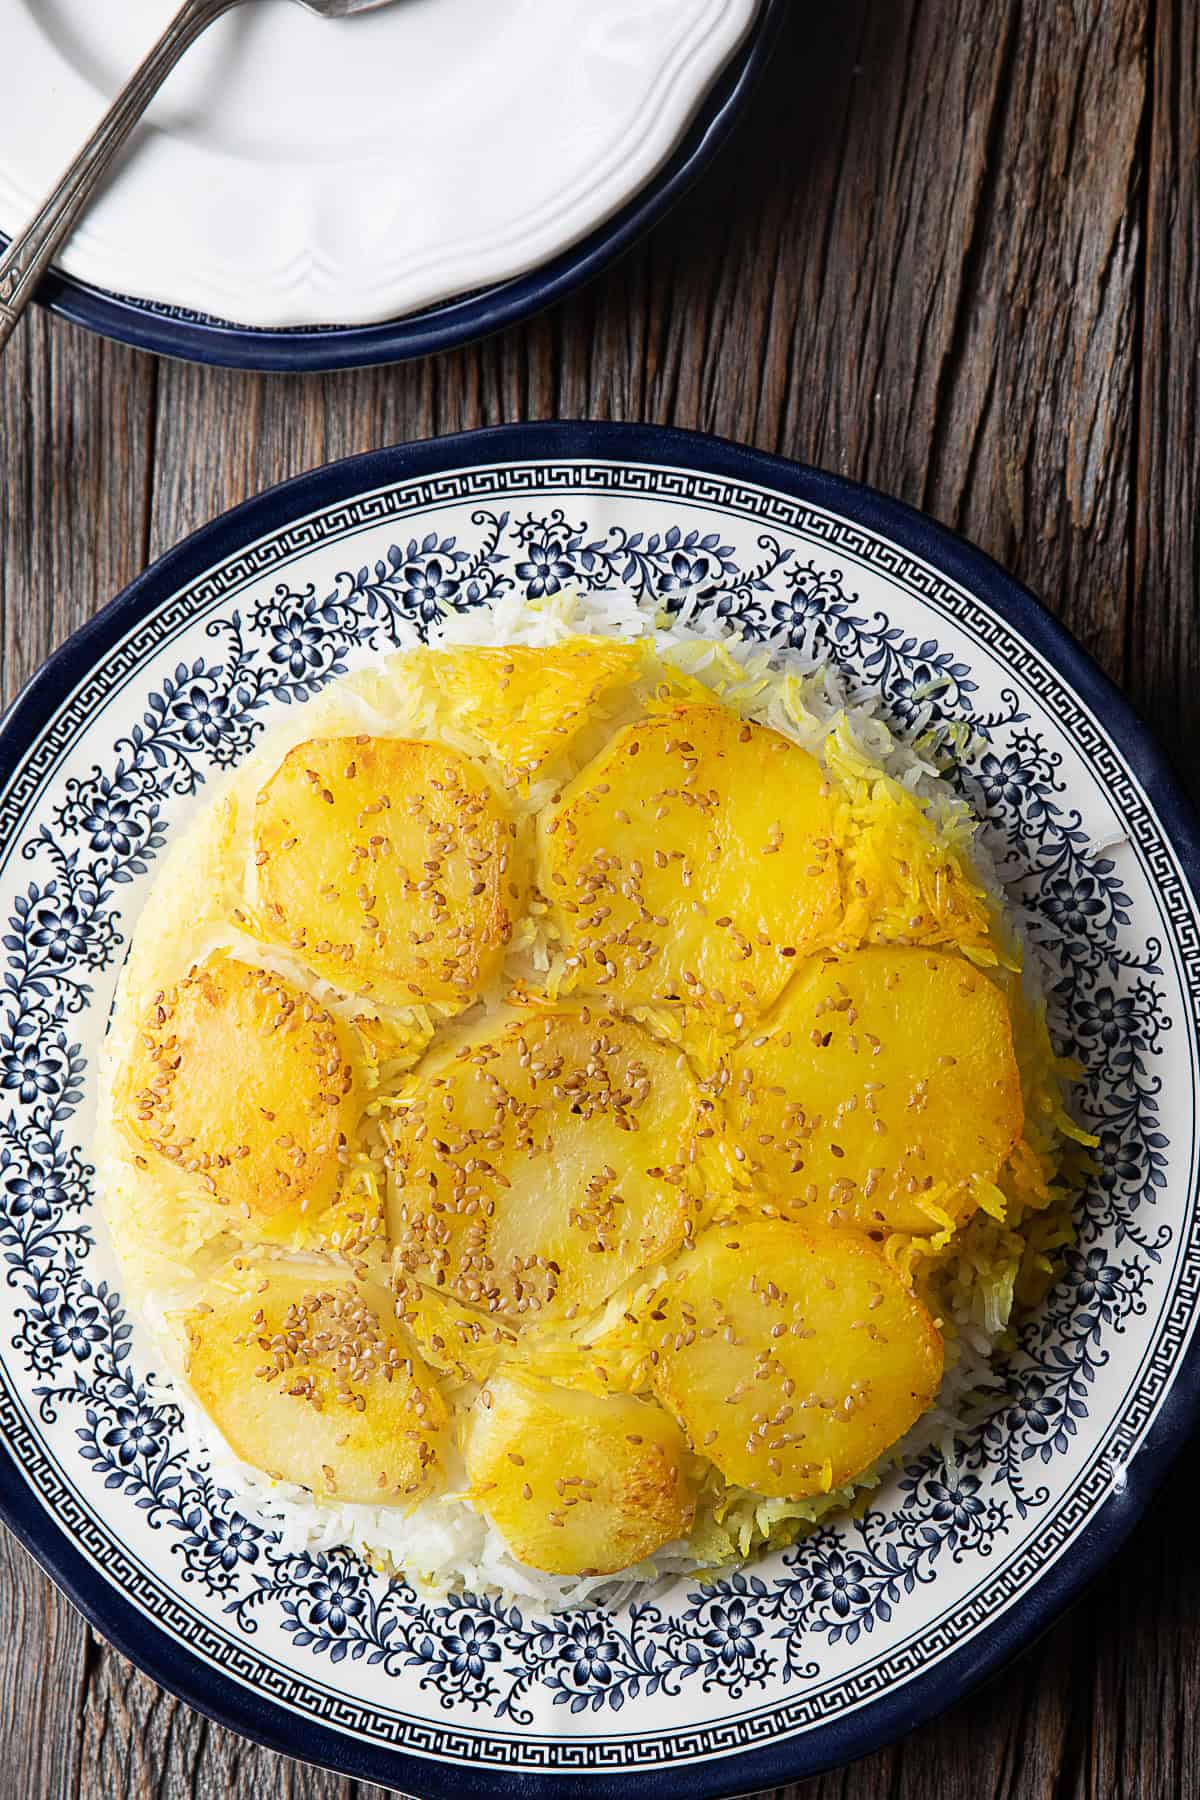 Golden potato slices on top of fragrant saffron rice, served in a traditional Iranian pot, showcasing the rich culinary heritage of Persian cuisine.